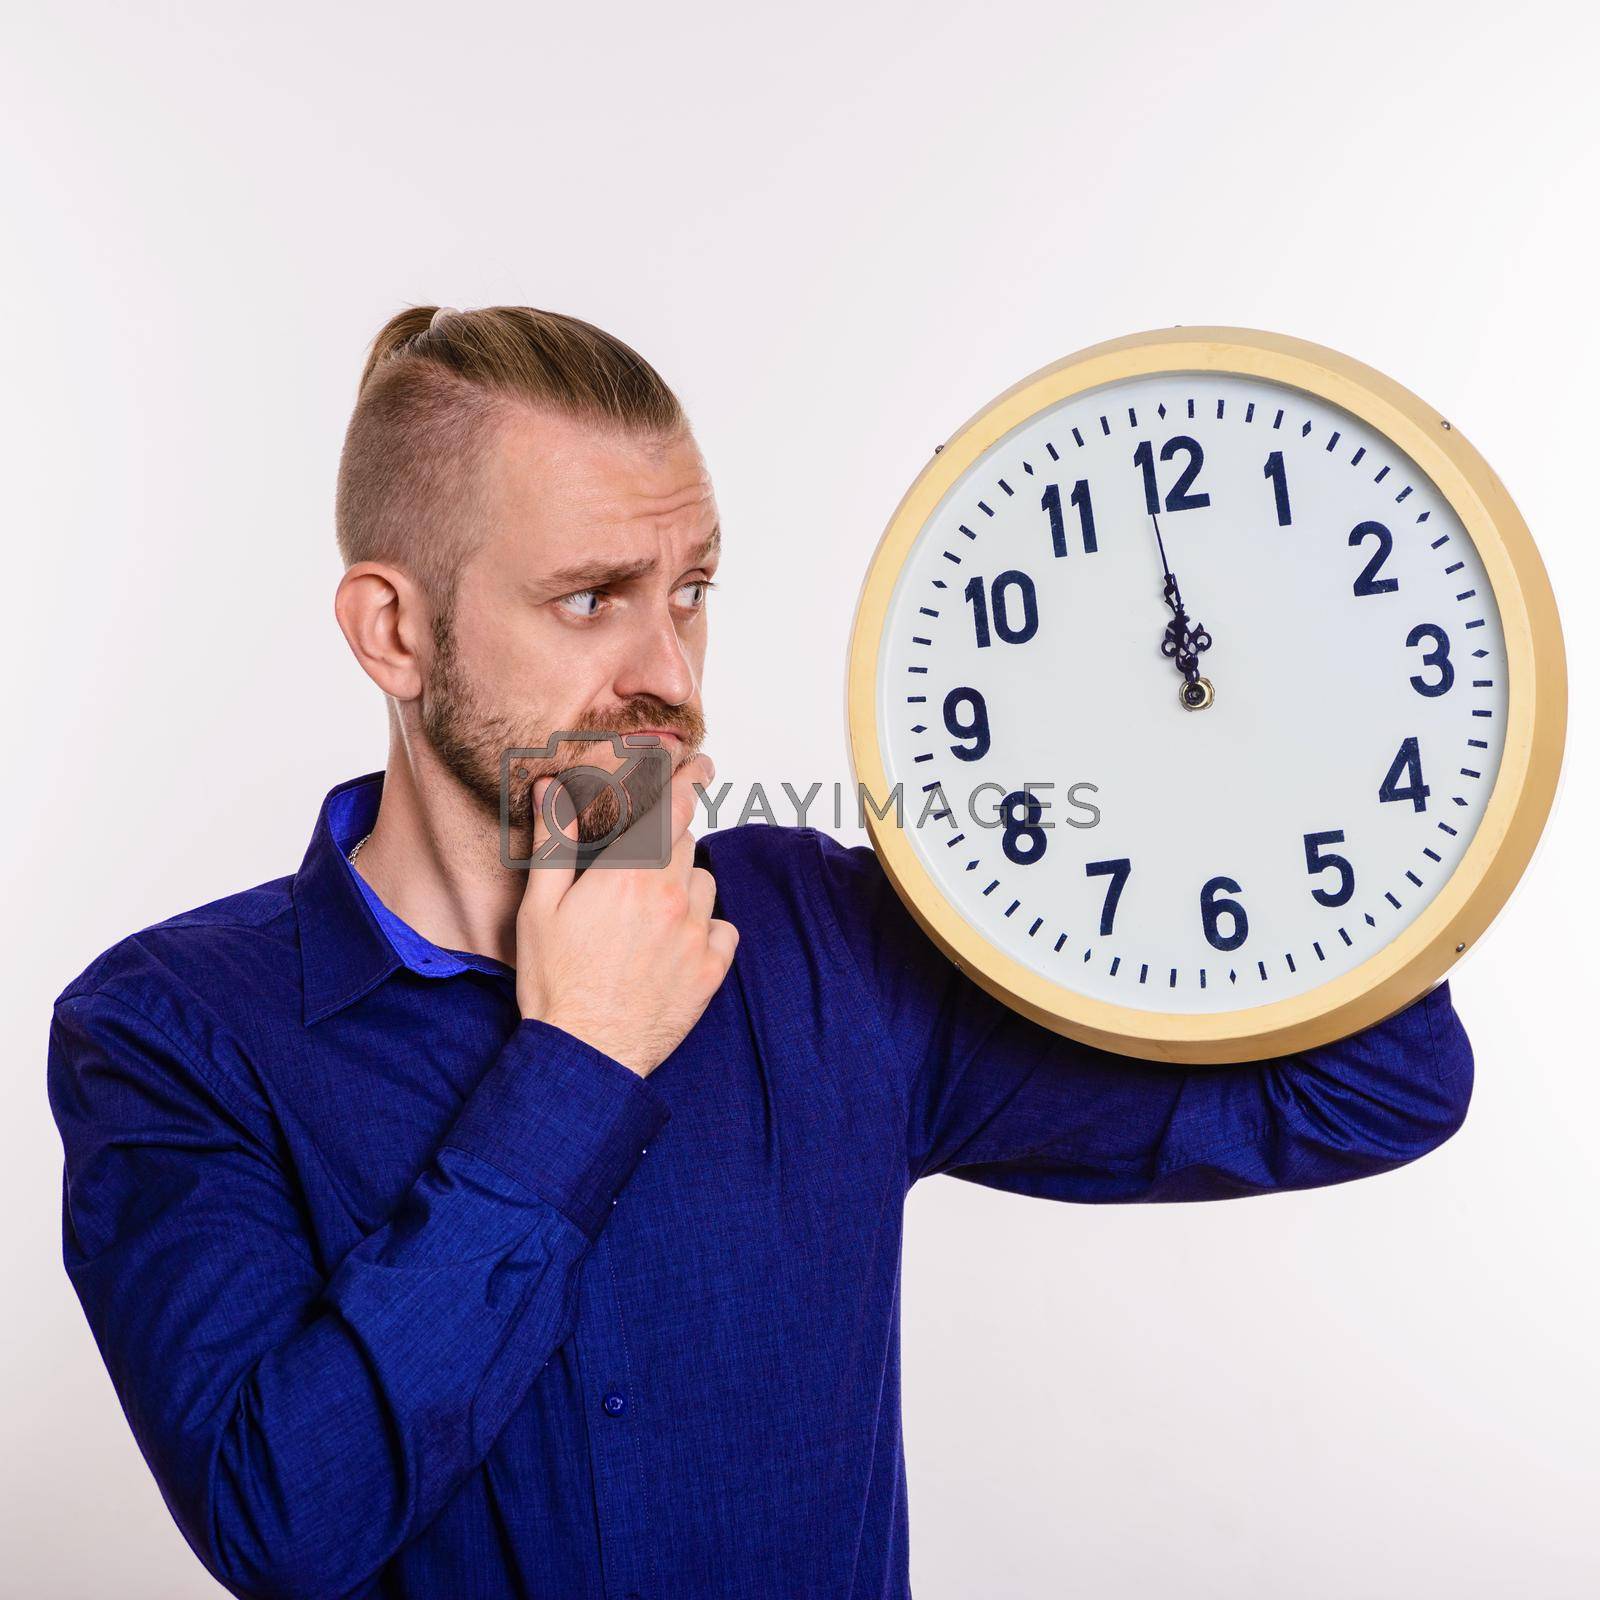 Royalty free image of A stylish man thinks out the idea and holds a large wall clock by zartarn